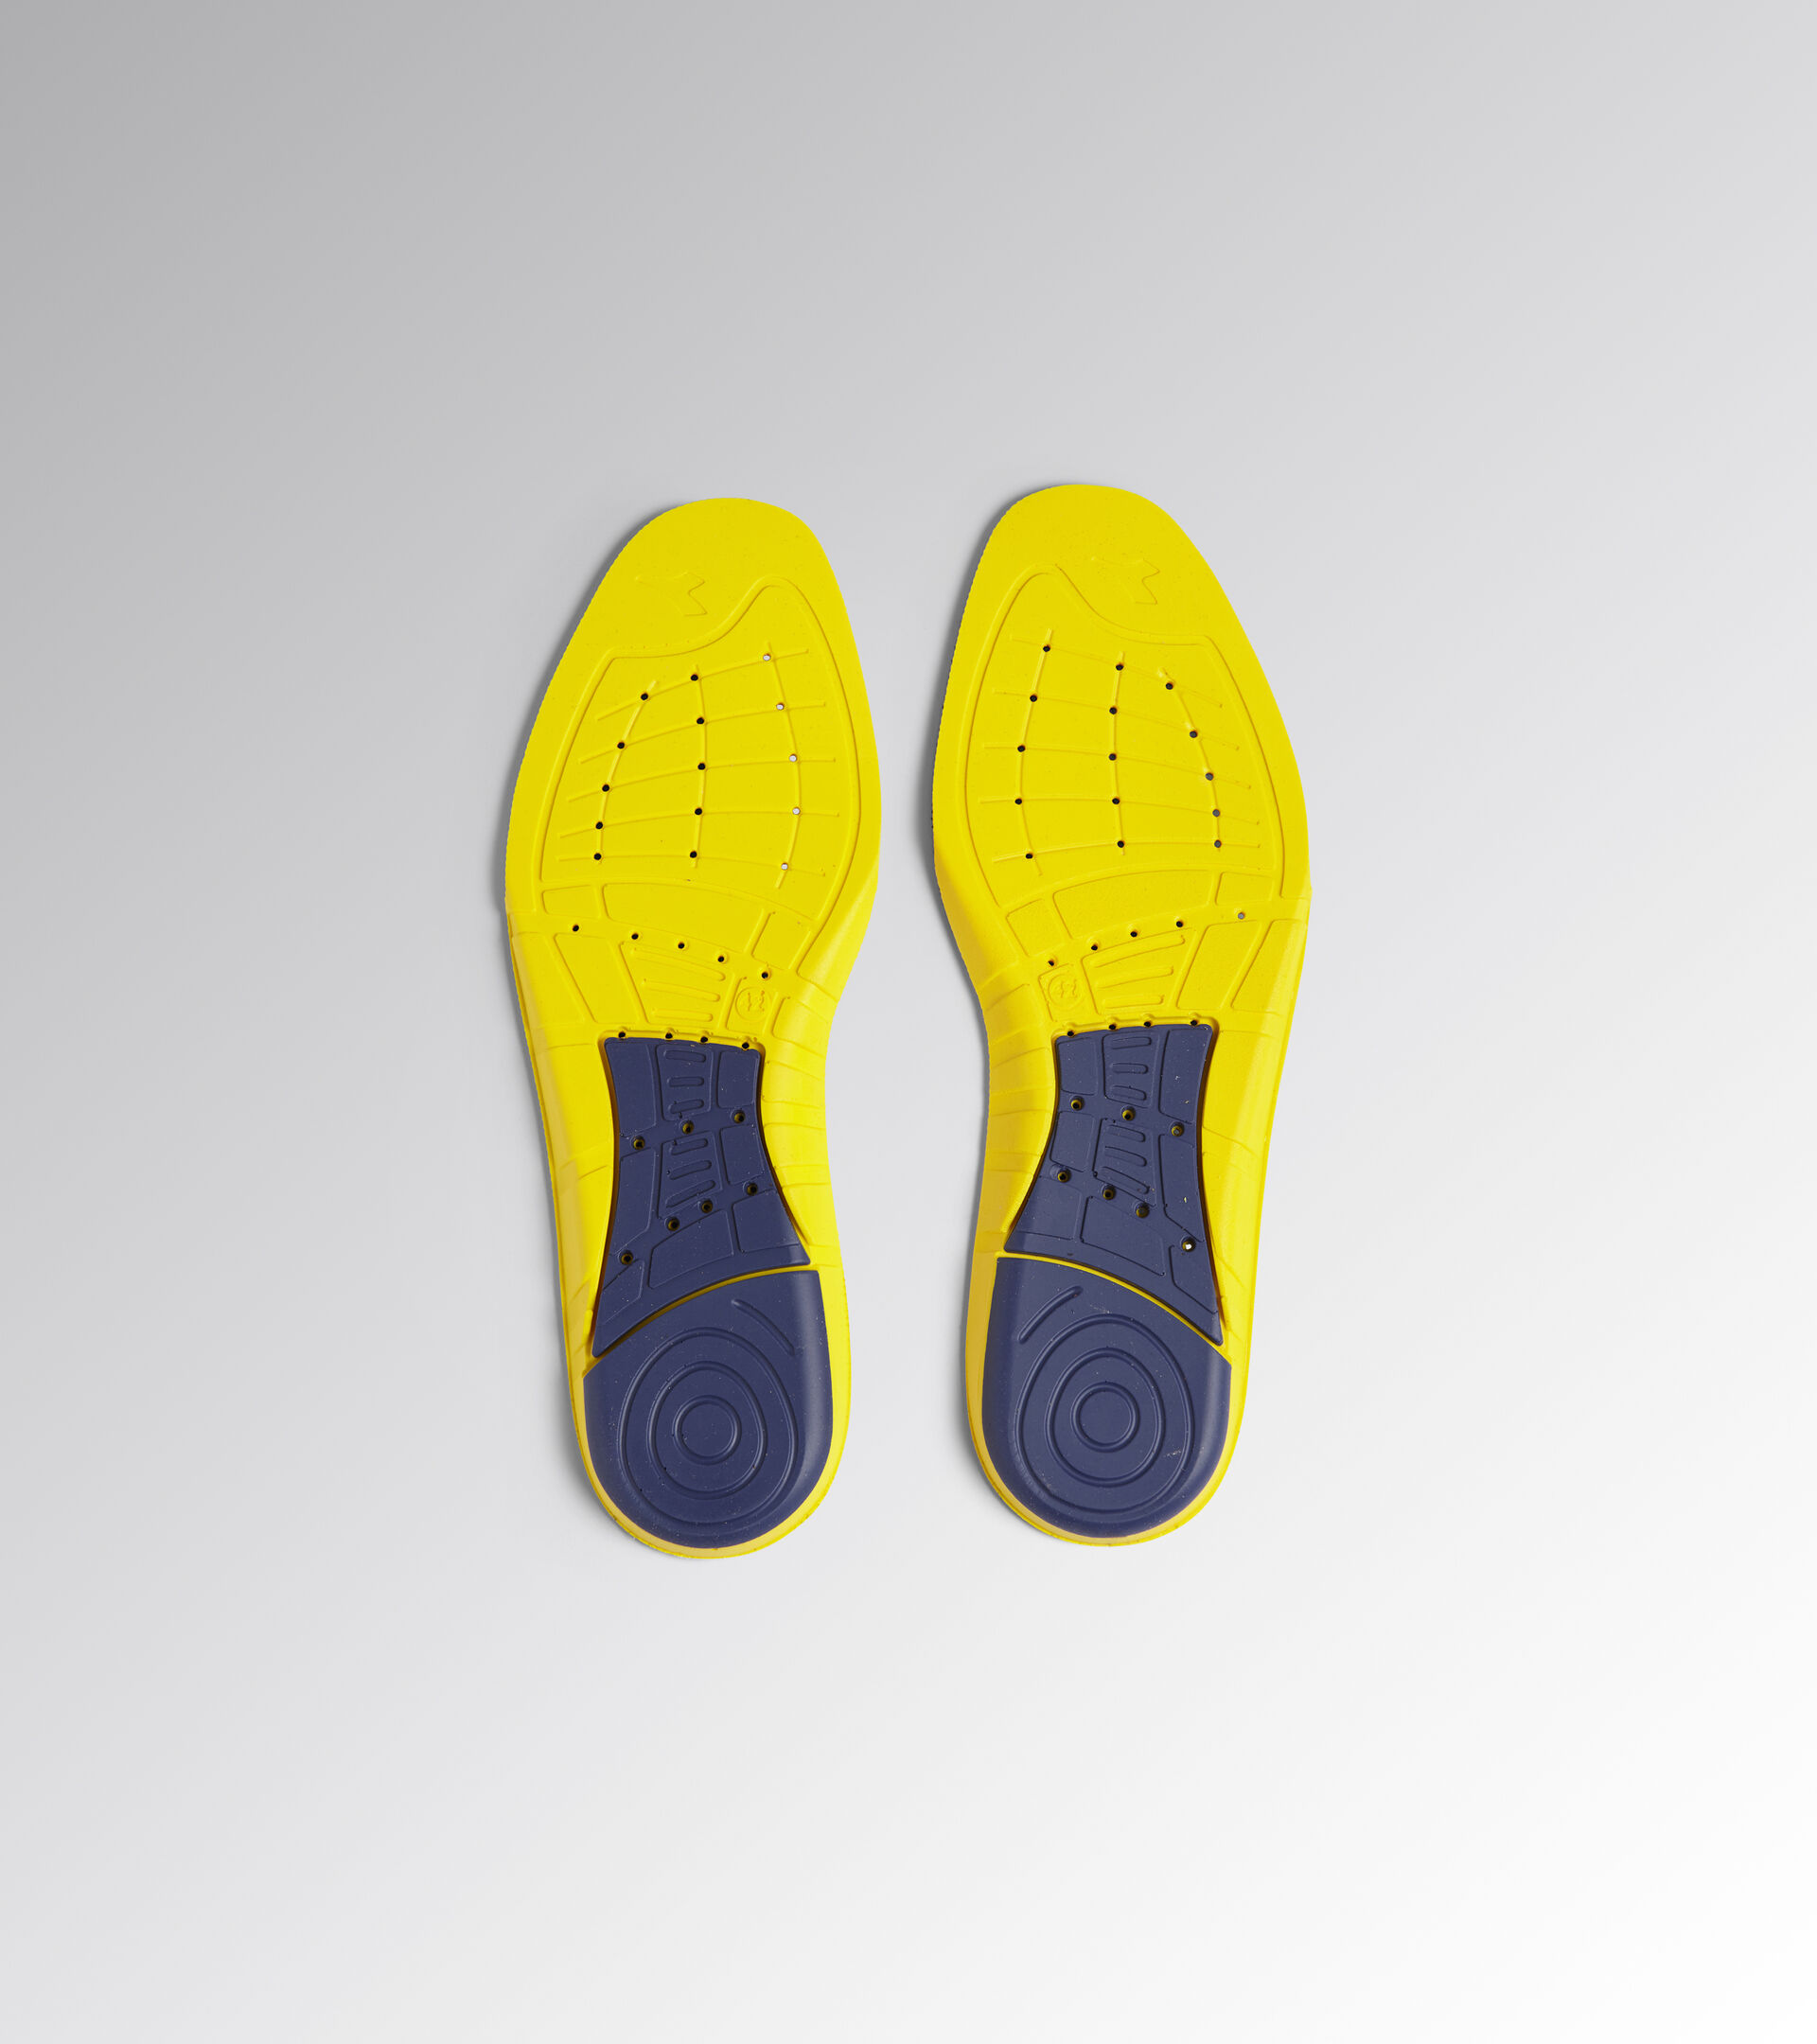 Insoles for Utility shoes INSOLE GEL PERFORMANCE SKY BLUE/YELLOW UTILITY - Utility